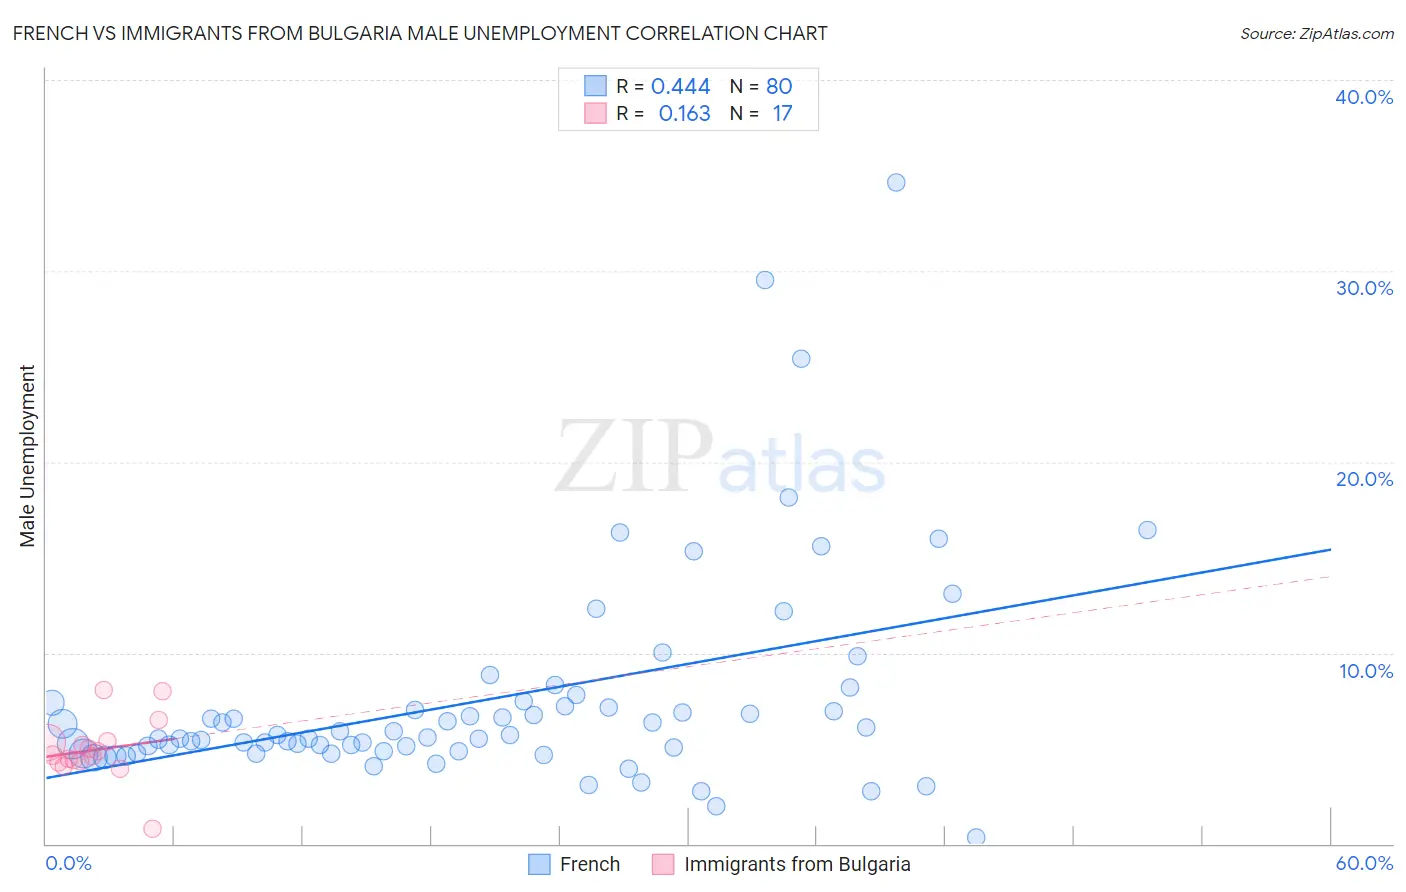 French vs Immigrants from Bulgaria Male Unemployment